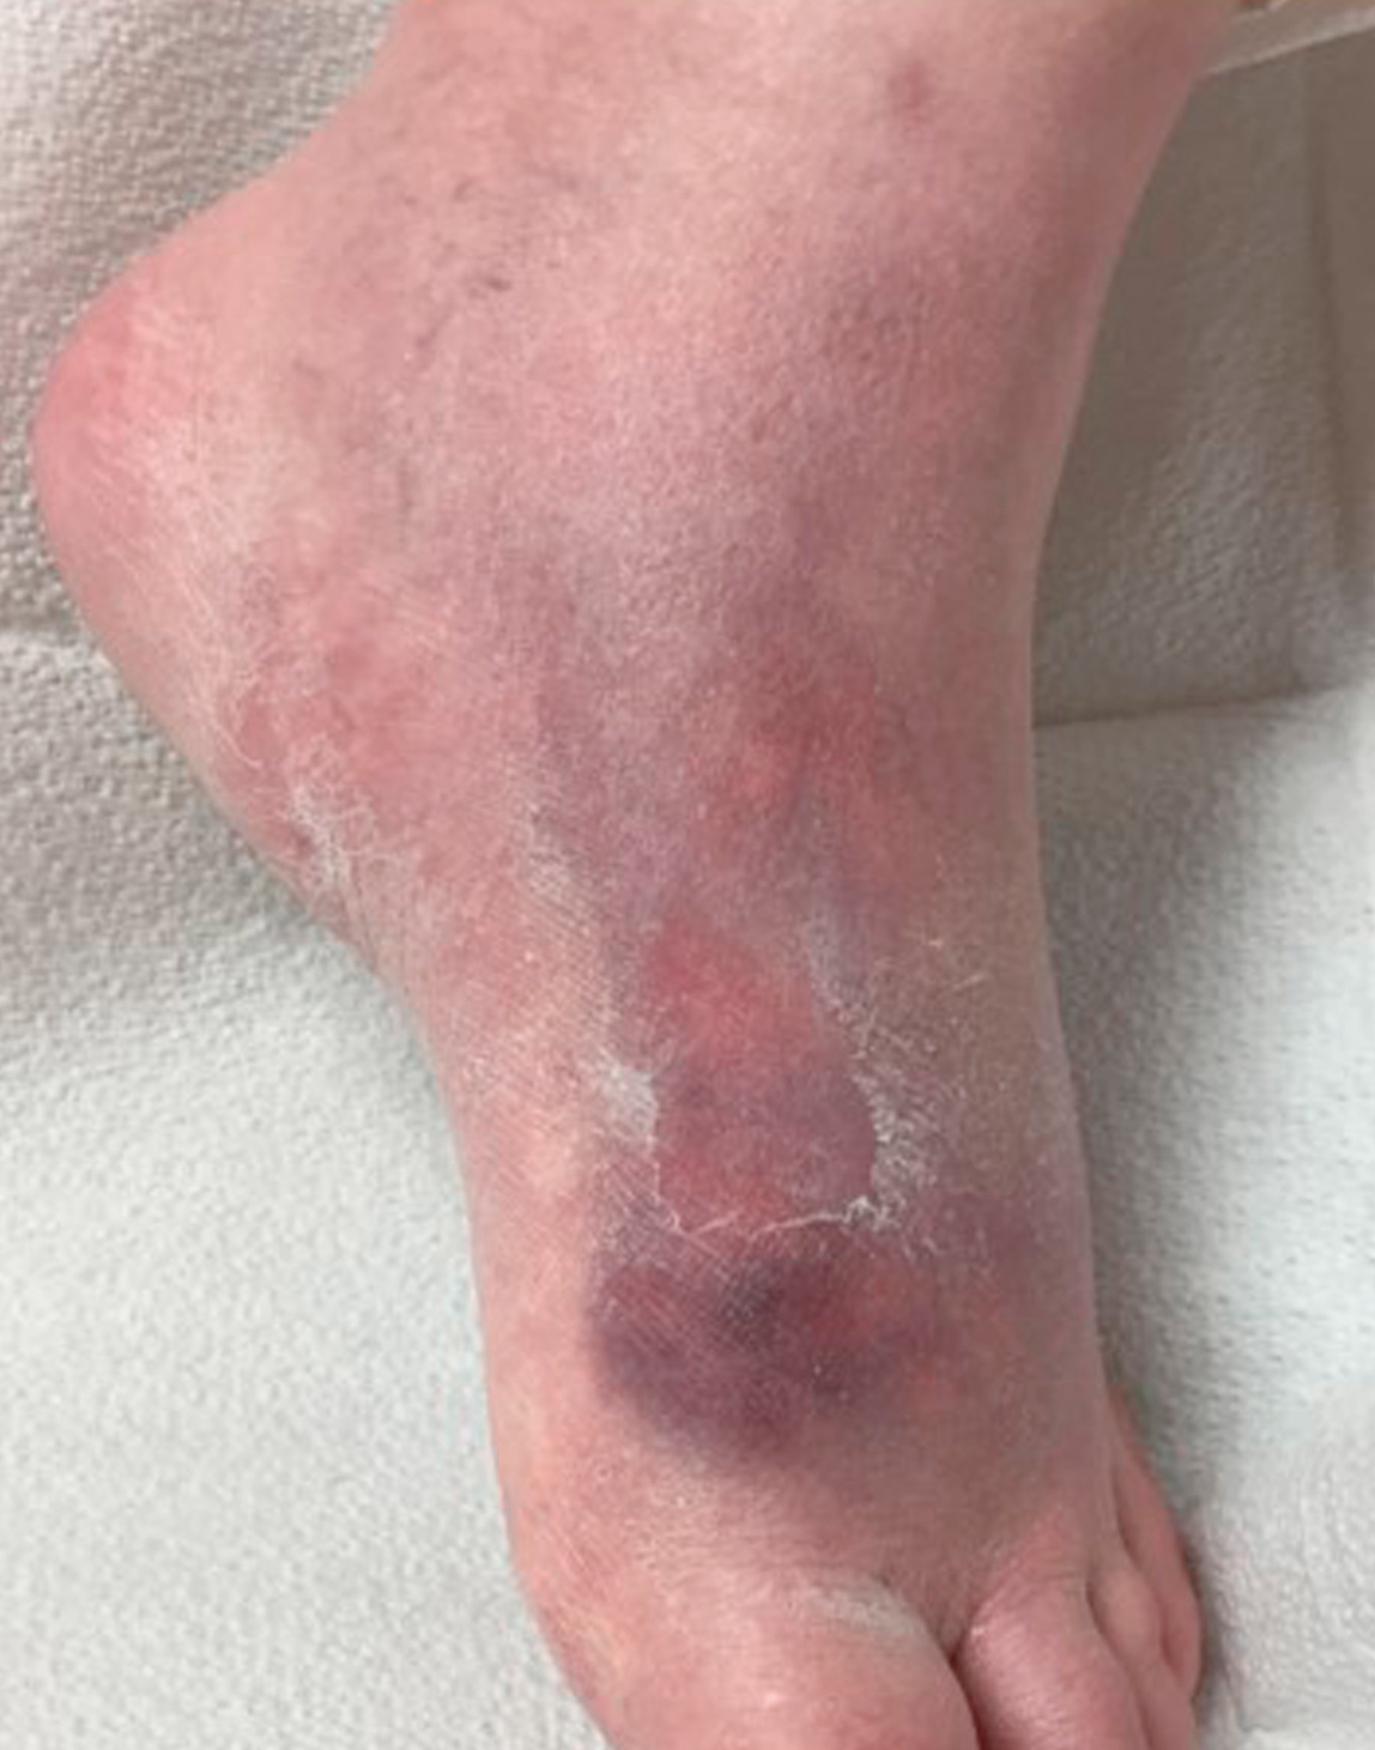 Fig. 52.32, A patient with a Crohn disease flare and active erythema nodosum. Note the red purplish nodule on the dorsum of the foot.